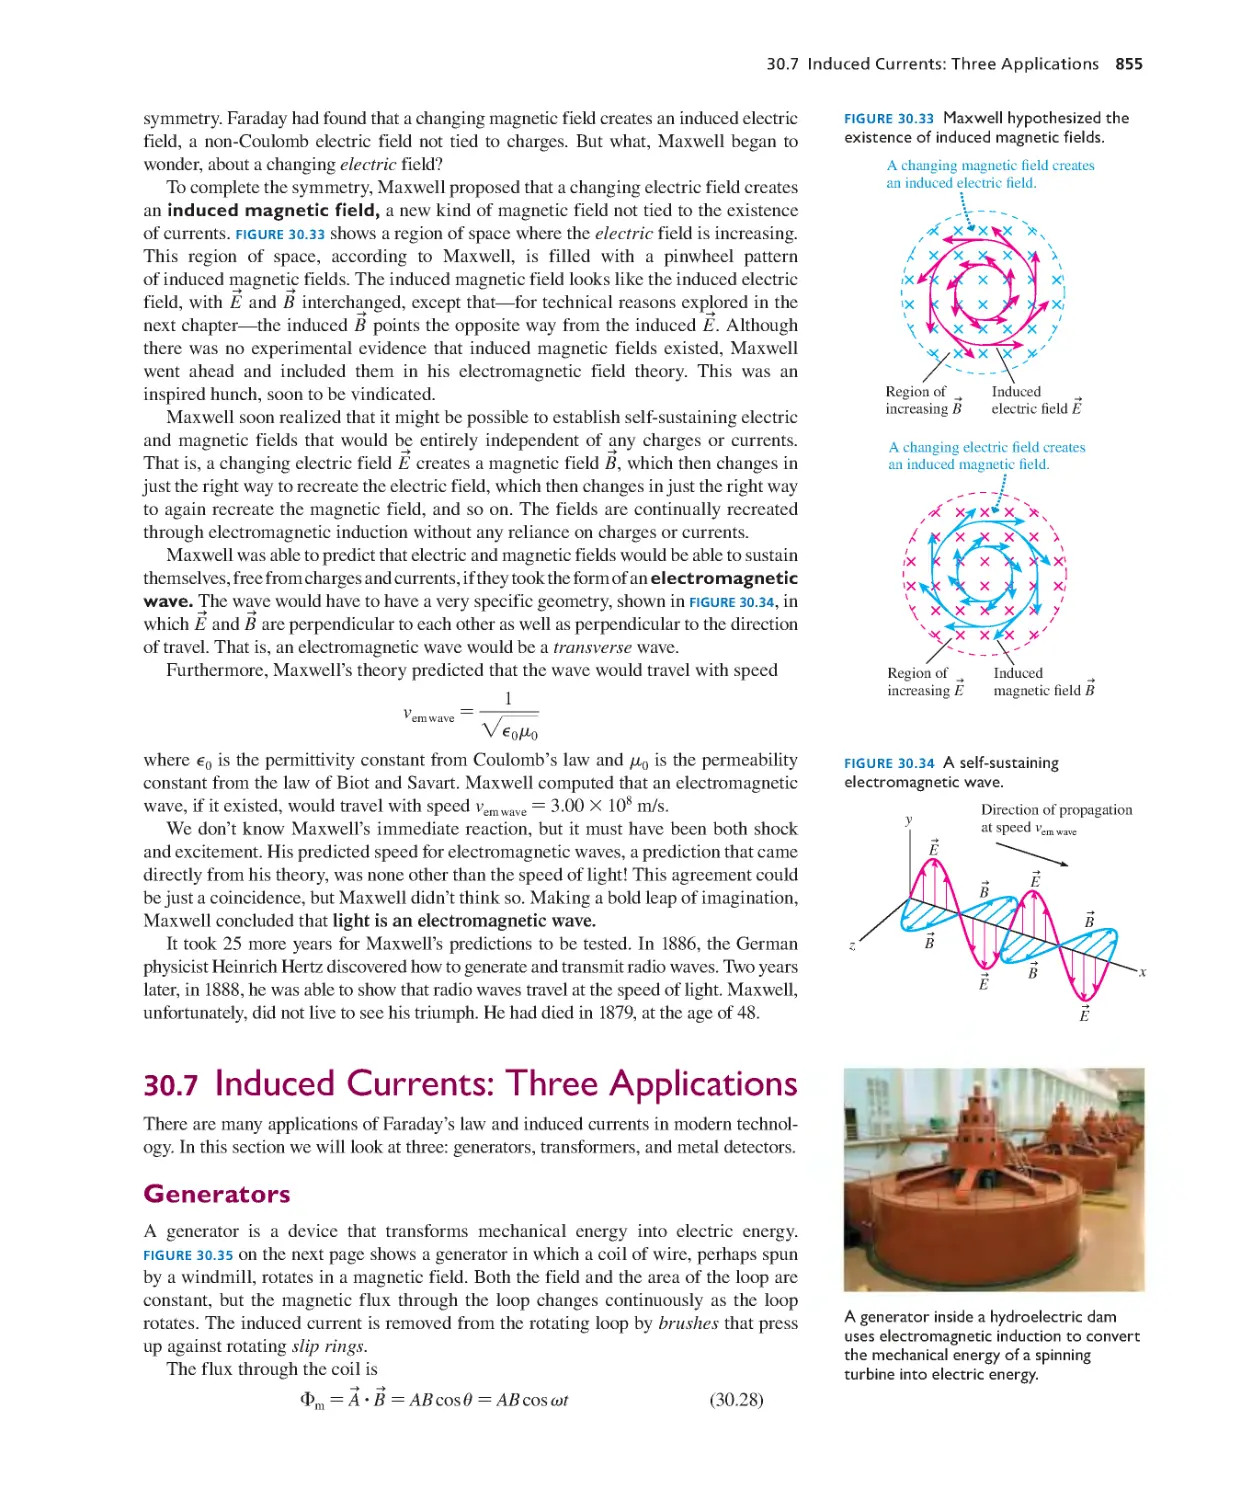 30.7. Induced Currents: Three Applications